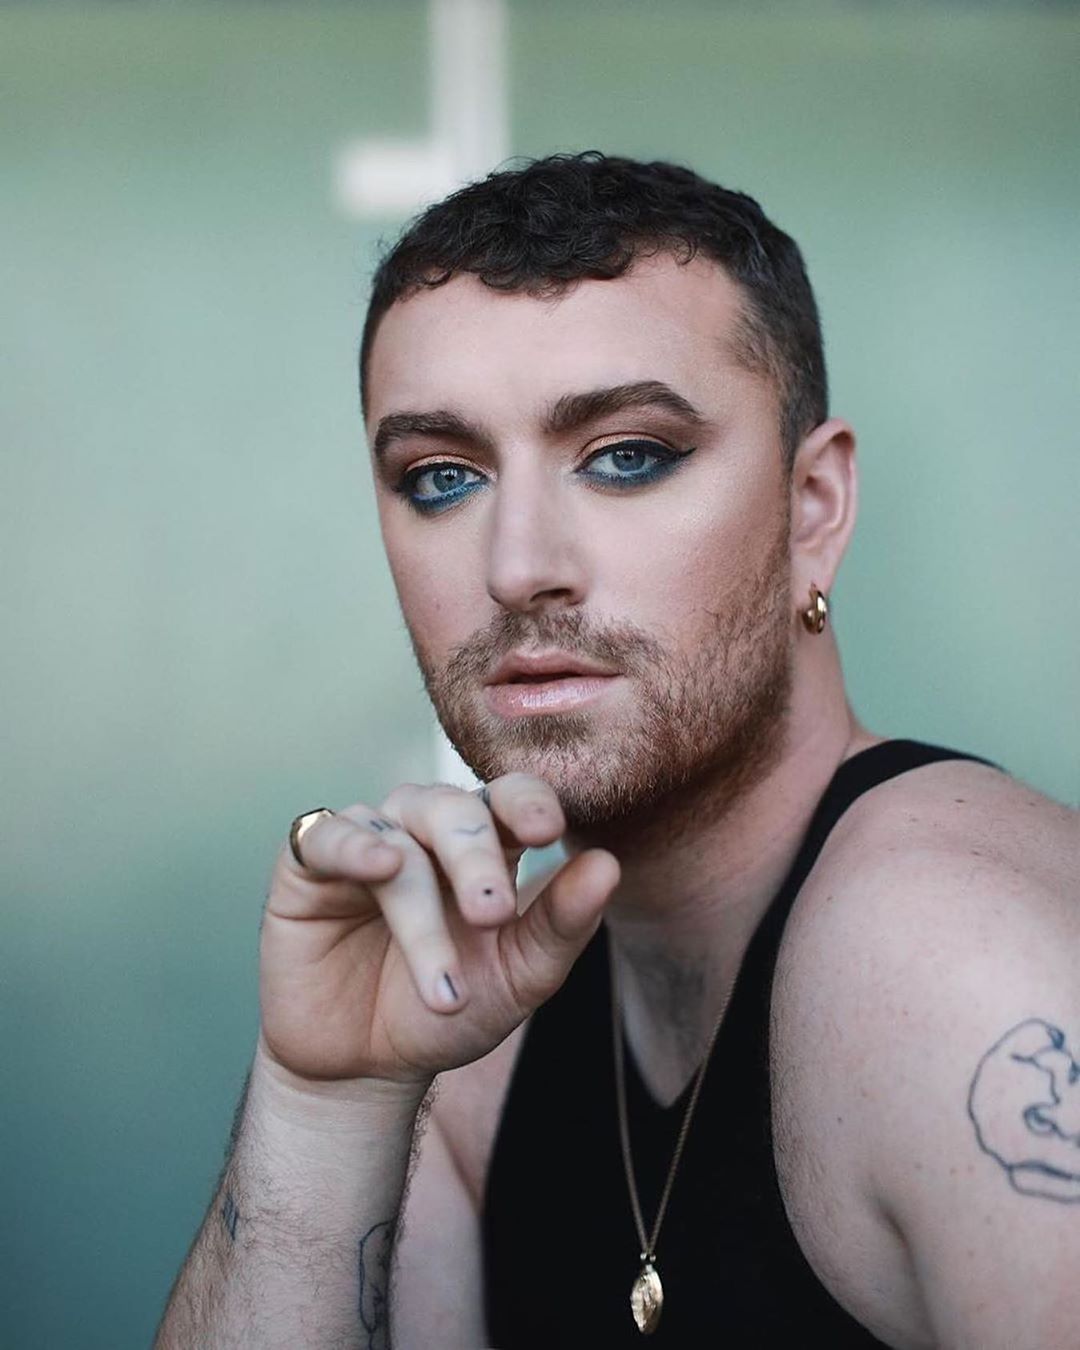 Sam Smith 'How Do You Sleep?,' 'Dancing With a Stranger' May Not Be On